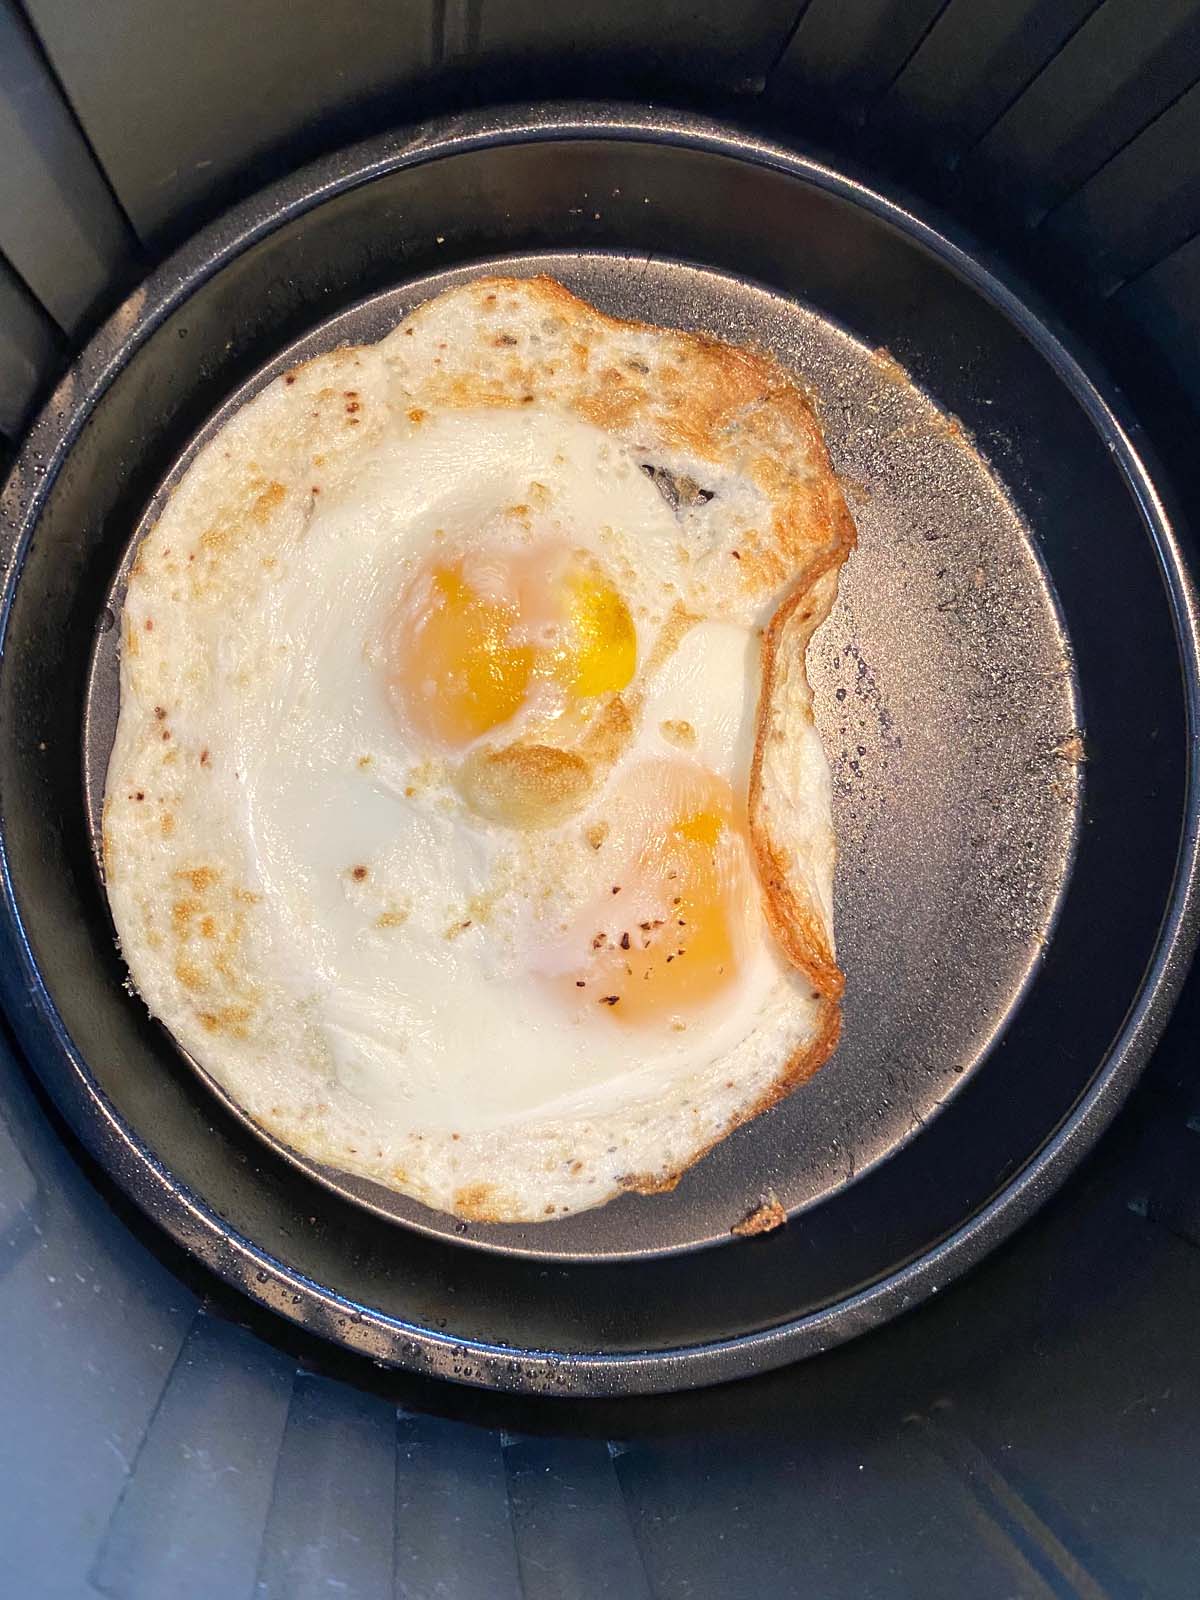 A pan inside a fryer basket with 2 eggs cooked inside.